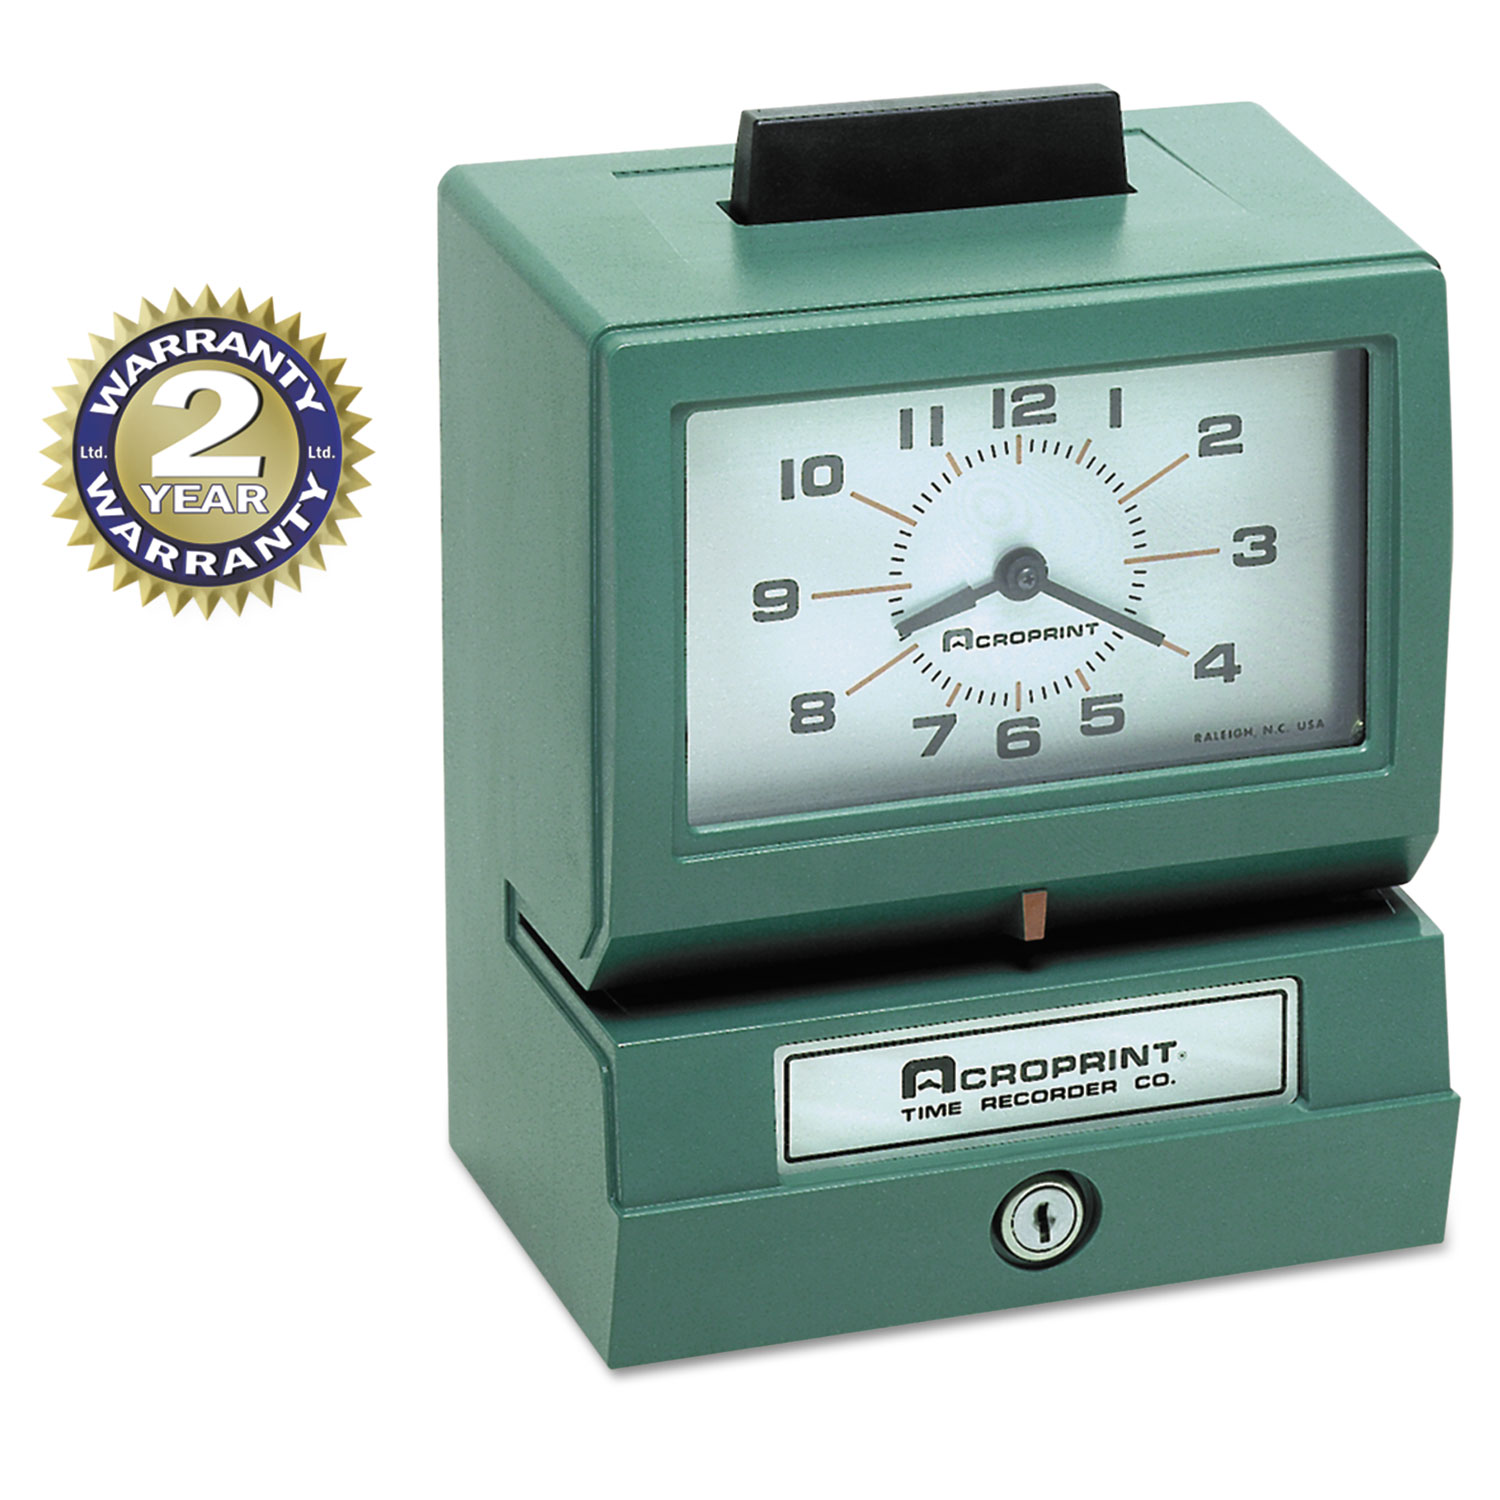  Acroprint 01-1070-413 Model 125 Analog Manual Print Time Clock with Month/Date/0-23 Hours/Minutes (ACP011070413) 